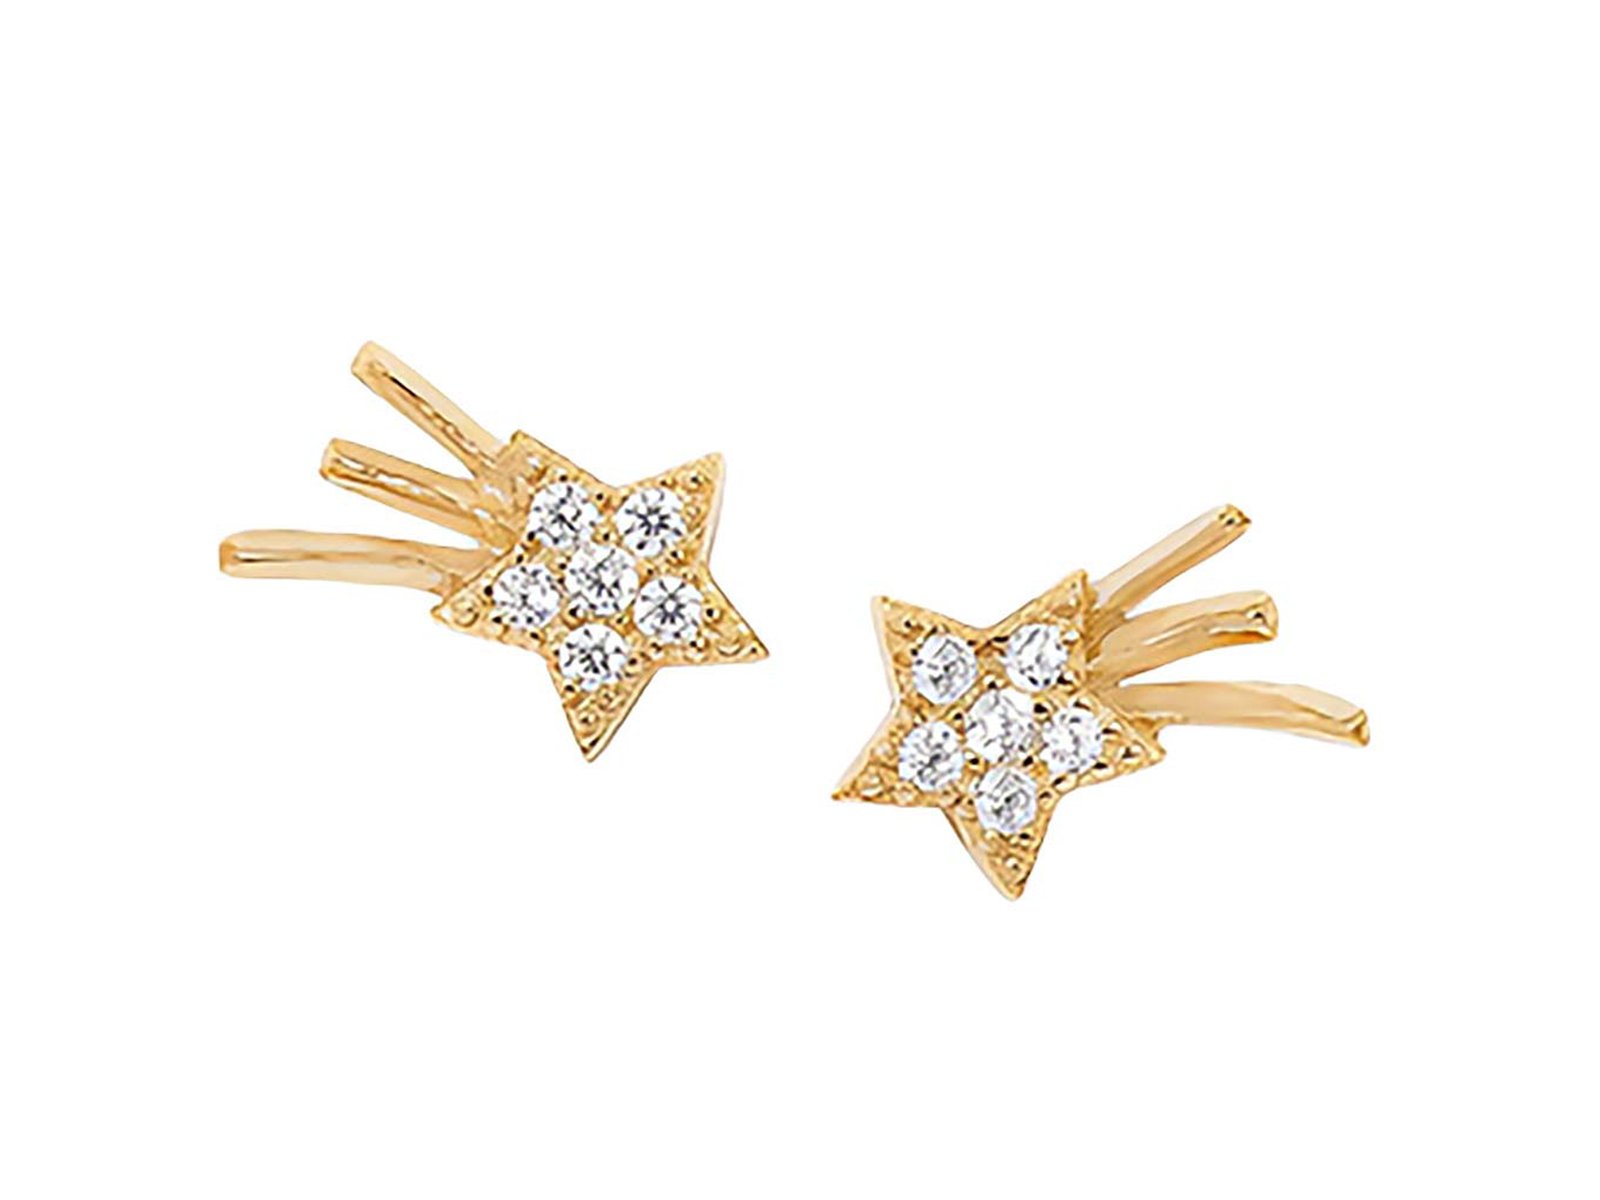 Gold stud earrings shaped like shooting stars embedded with diamonds by Adornmonde 